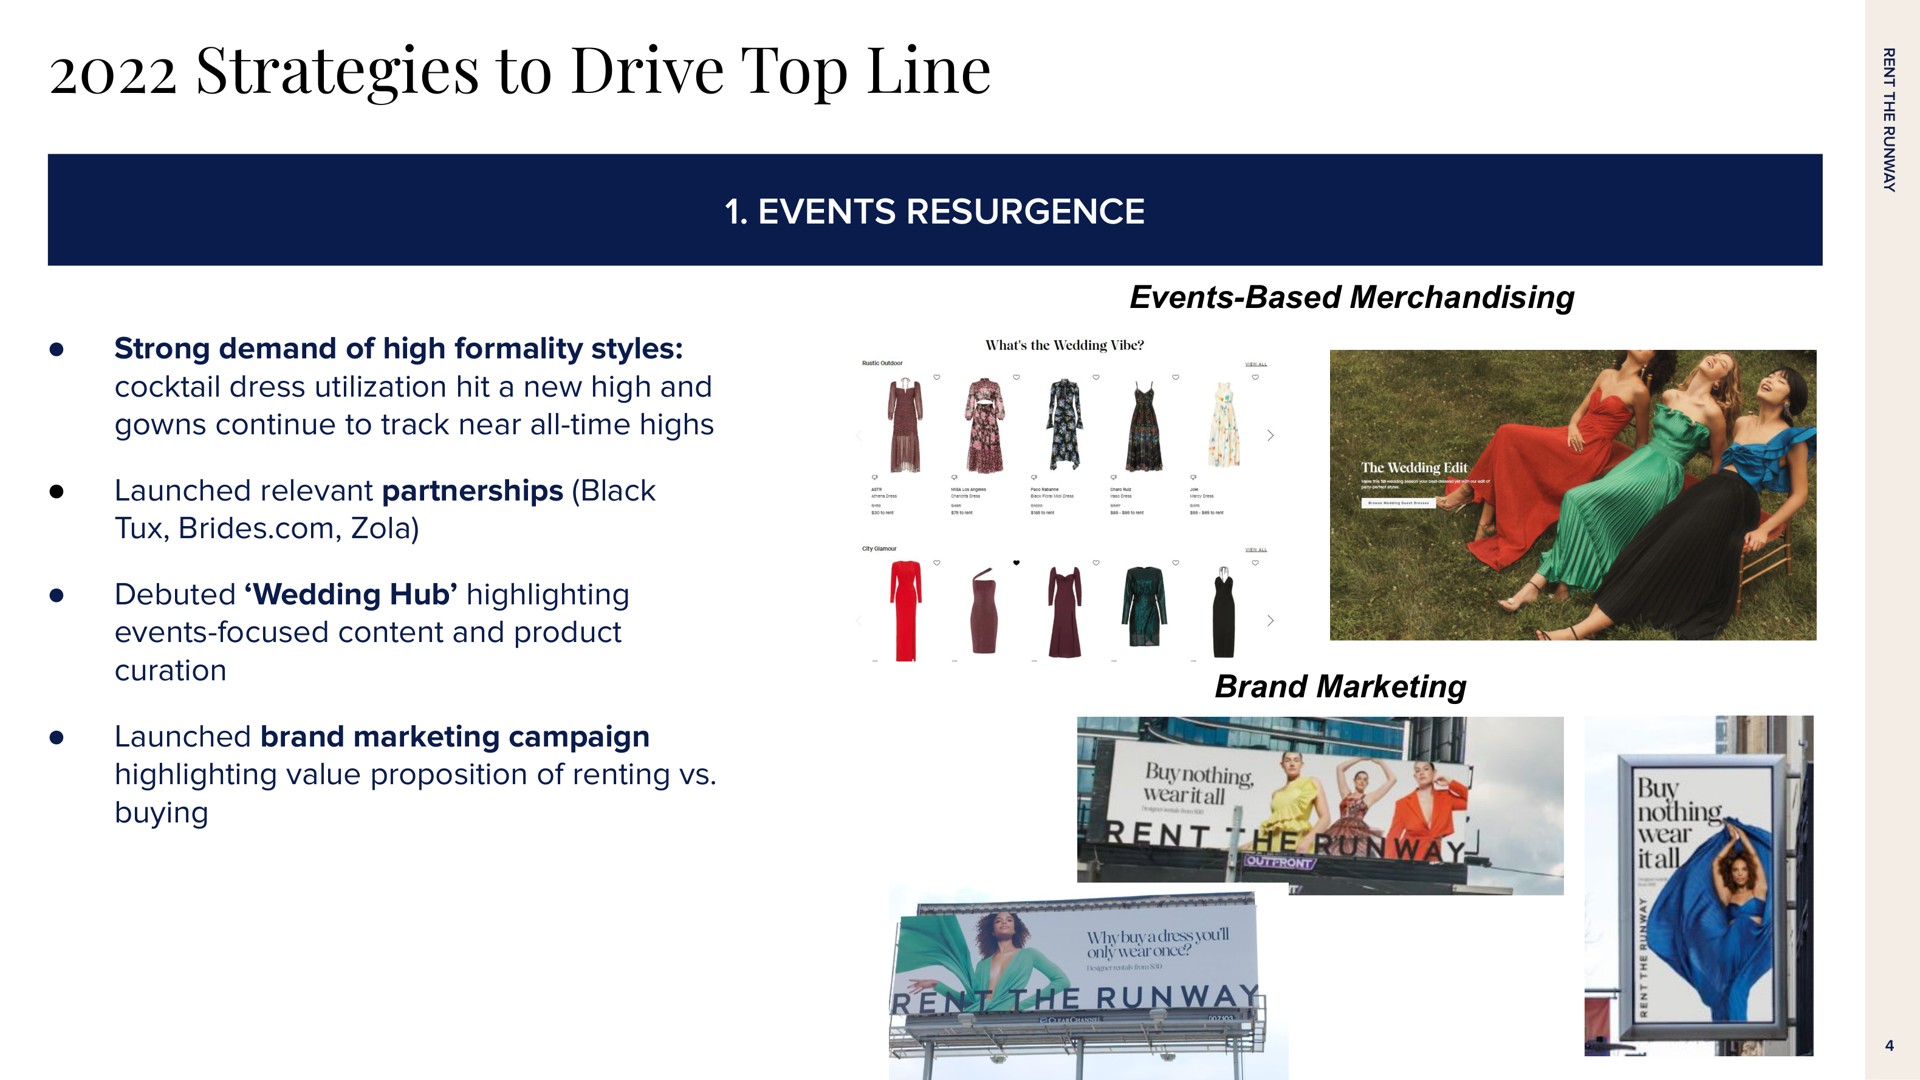 strategies to drive top line events resurgence events based merchandising strong demand of high formality styles cocktail dress utilization hit a new high and gowns continue to track near all time highs launched relevant partnerships black tux brides debuted wedding hub highlighting events focused content and product curation launched brand marketing campaign highlighting value proposition of renting buying brand marketing | Rent The Runway